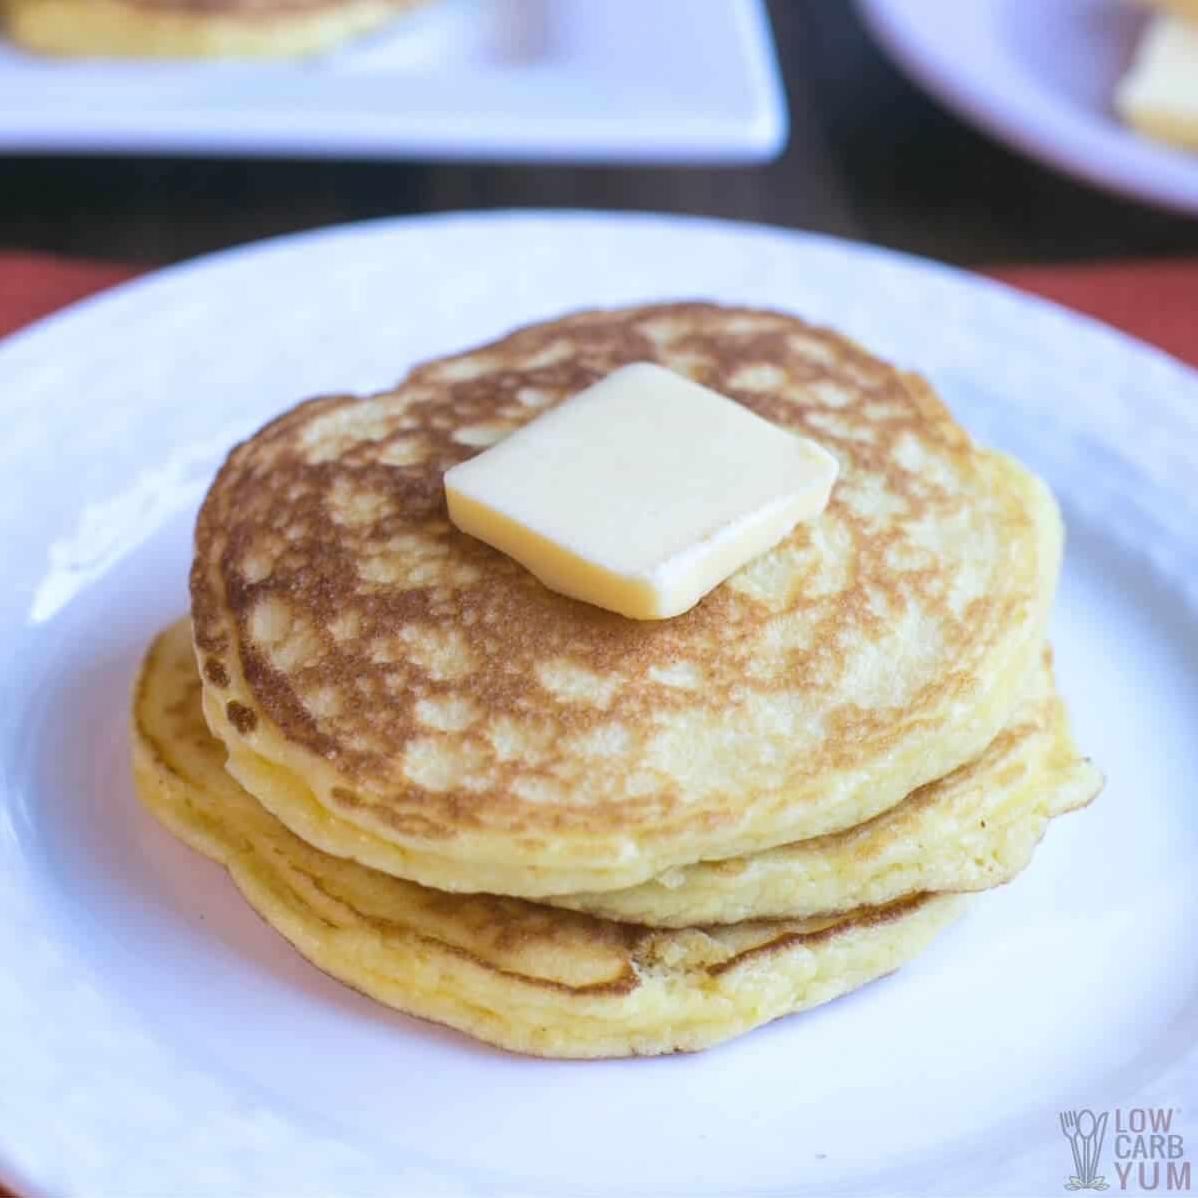  These pancakes don't just look good, they taste amazing too